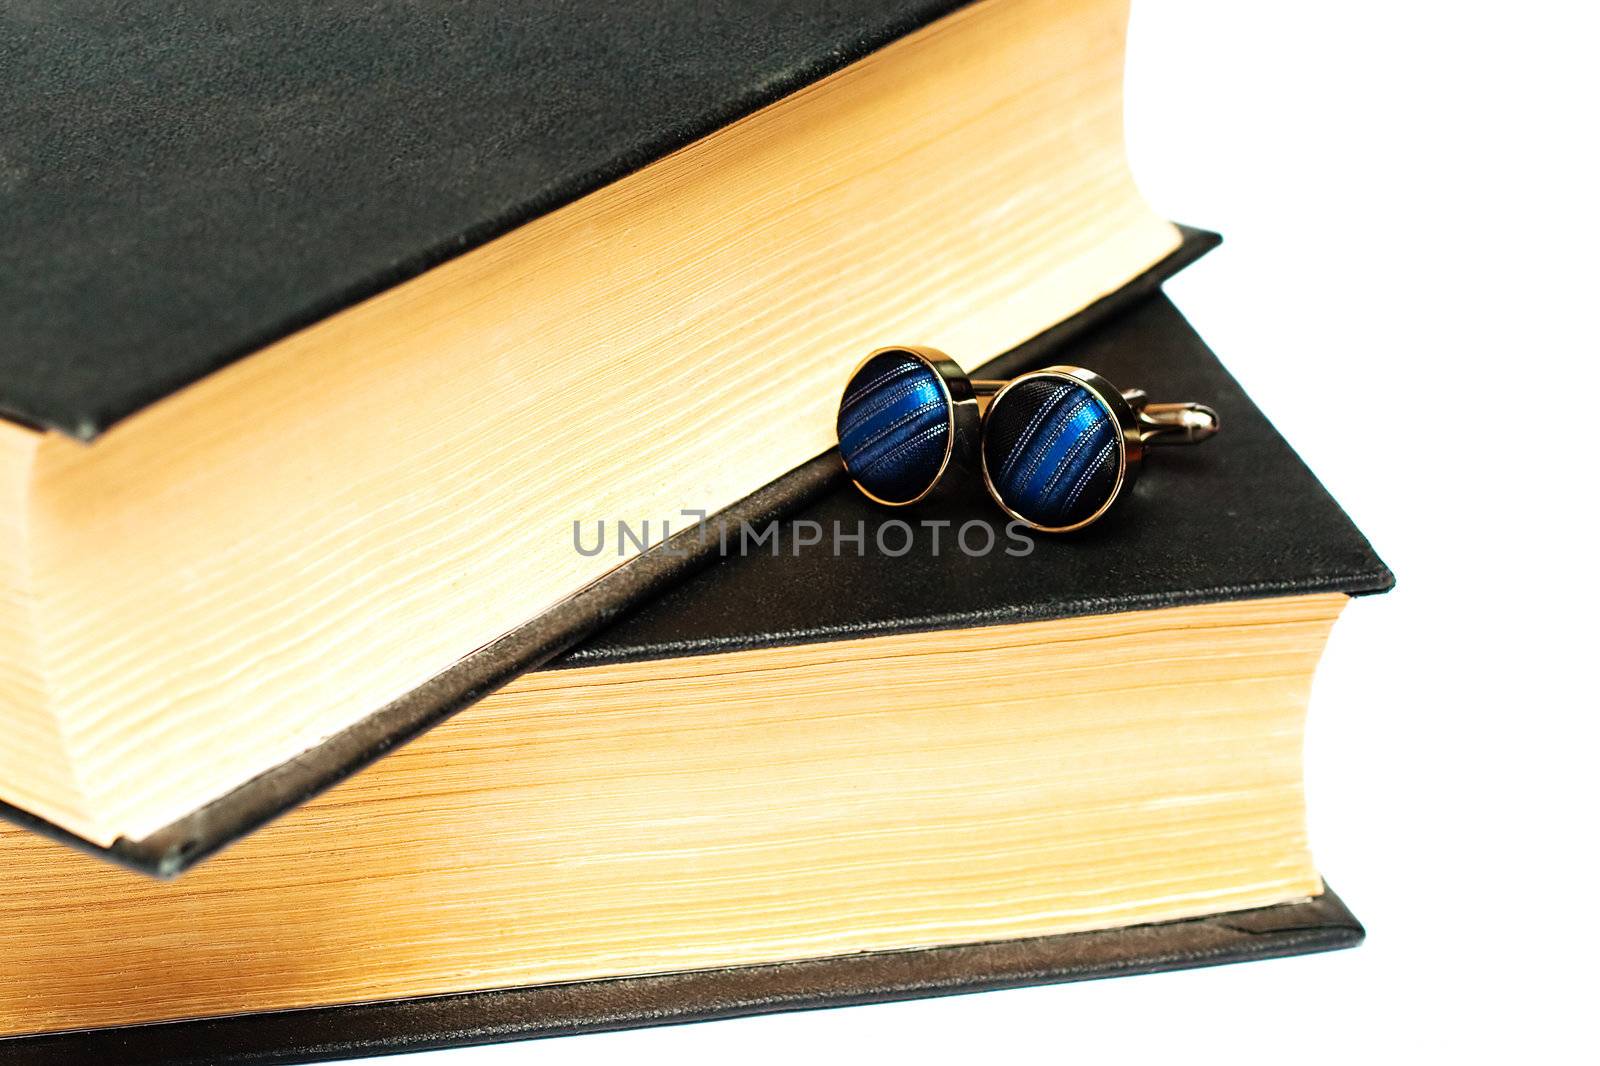 Cufflinks lying on the book, were once very popular